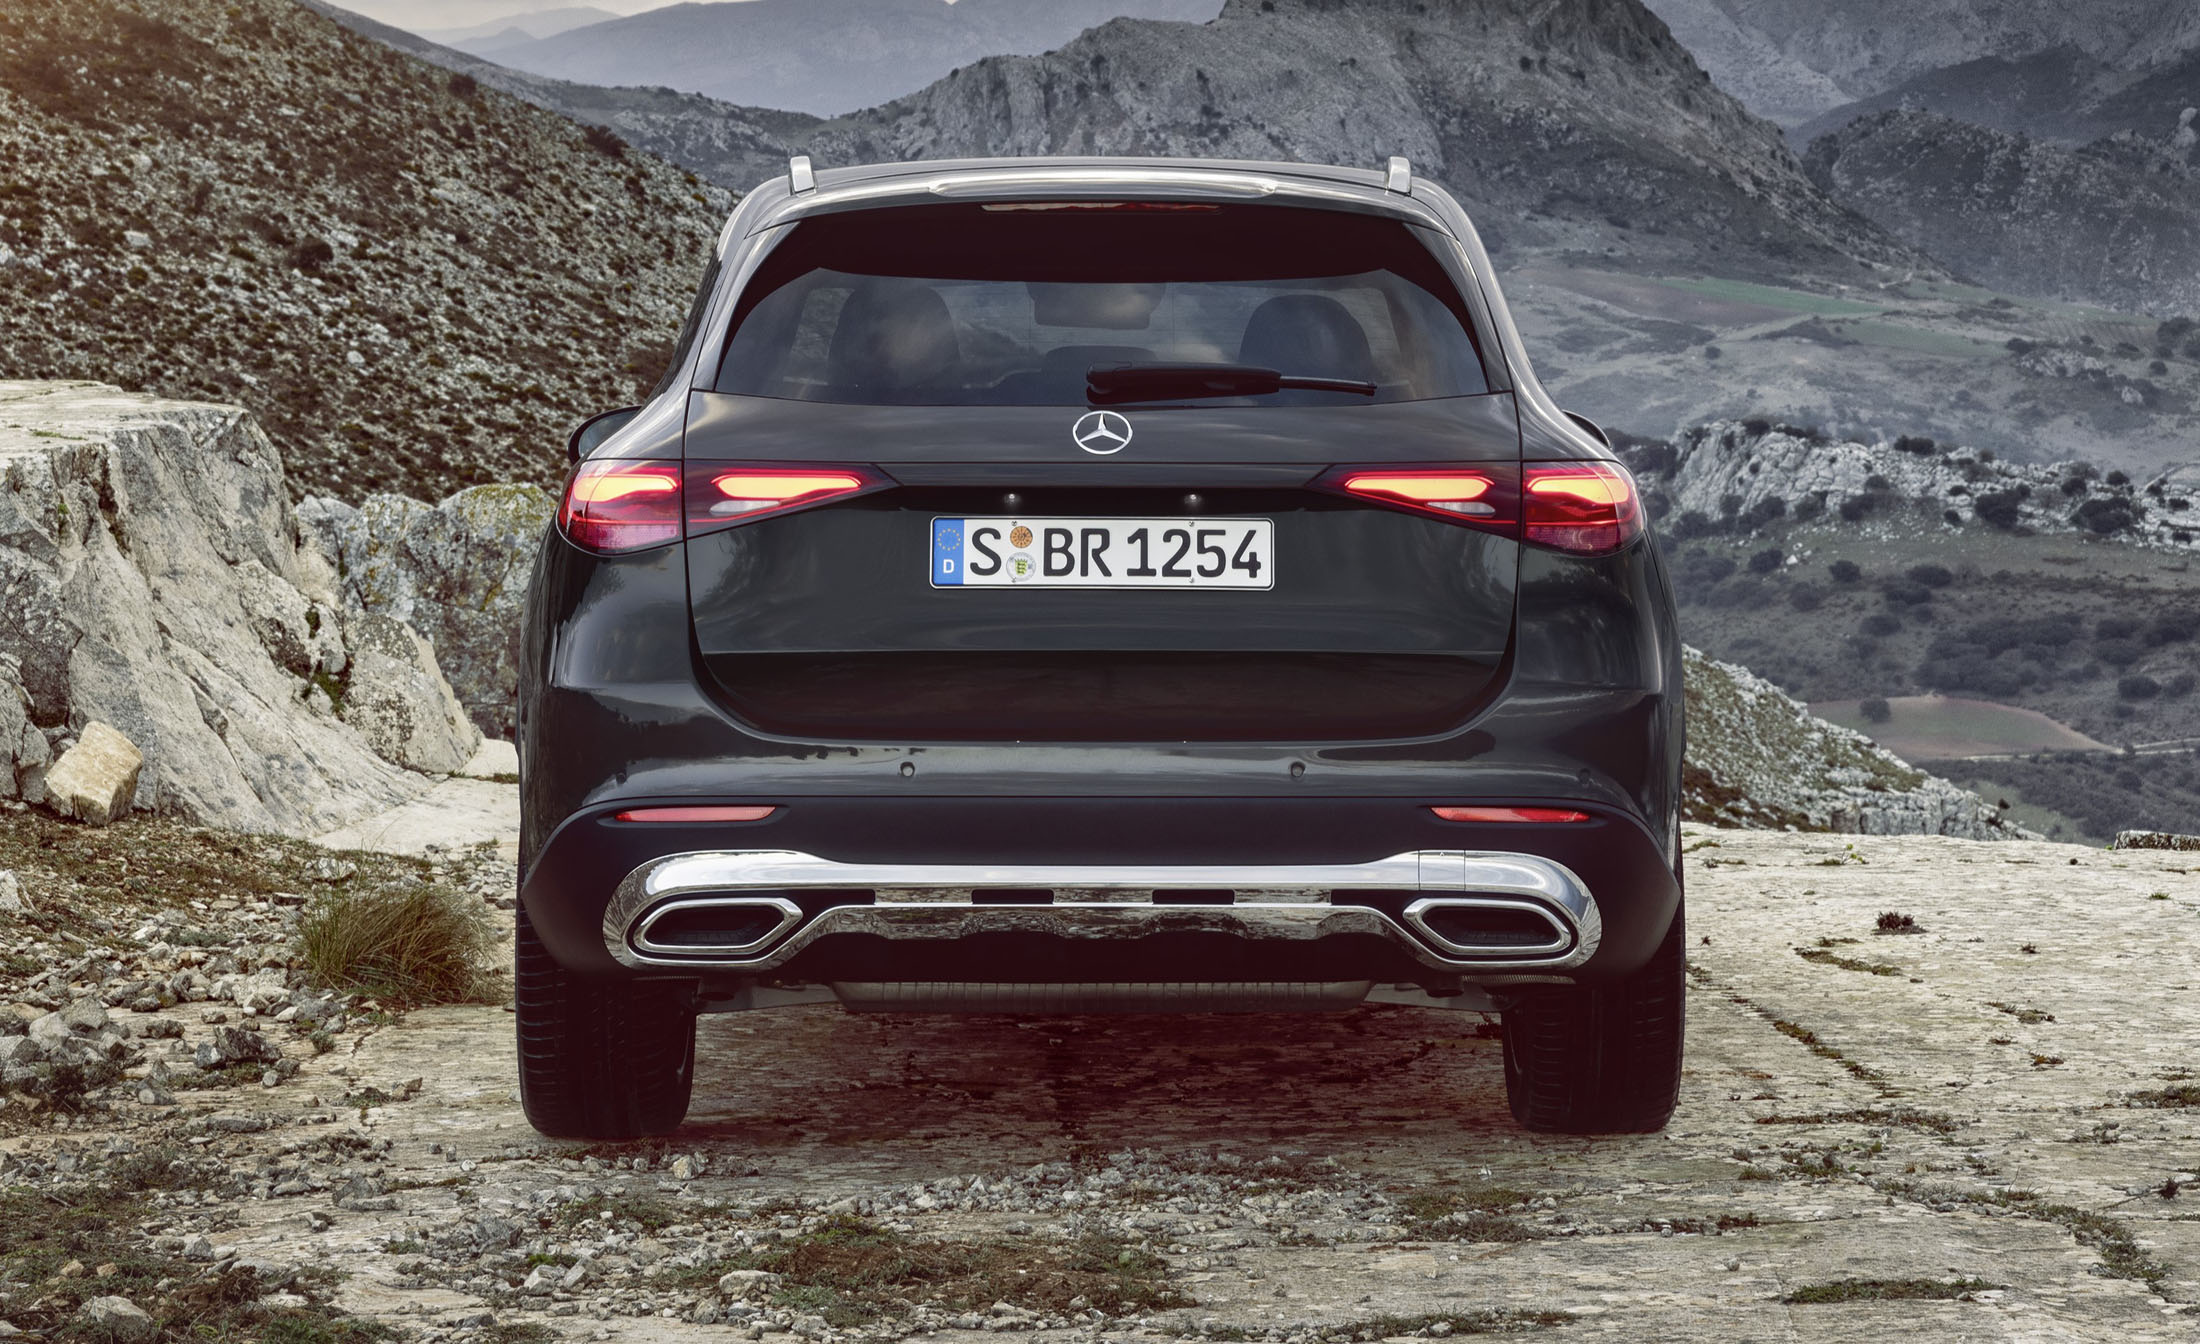 mercedes-benz, mercedes-benz glc, new mercedes-benz glc officially goes on sale in south africa – what’s available